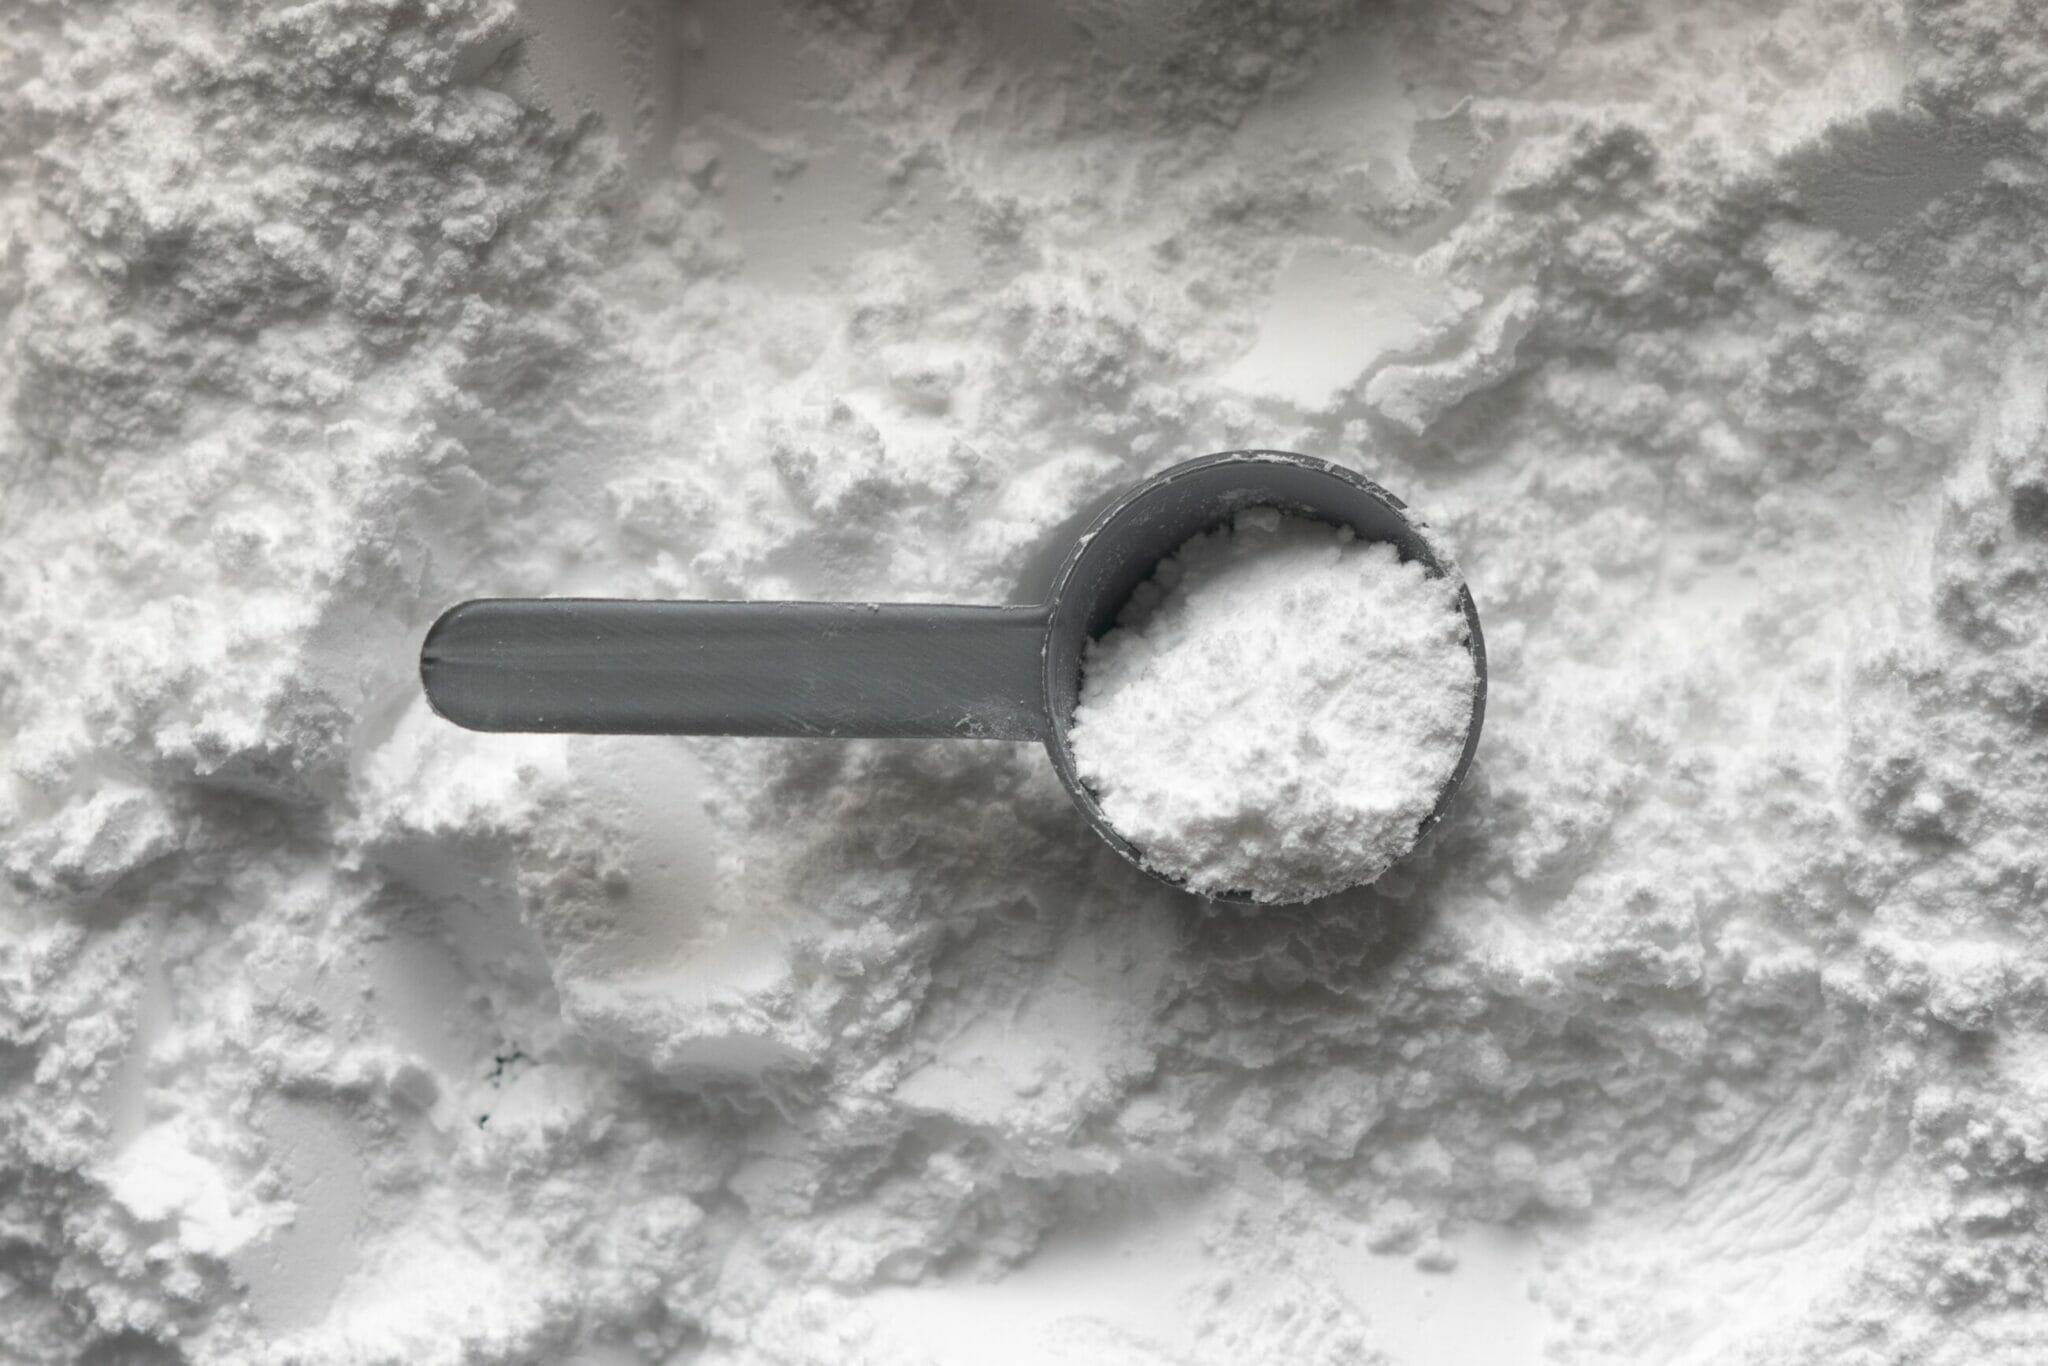 a scoop with white powder